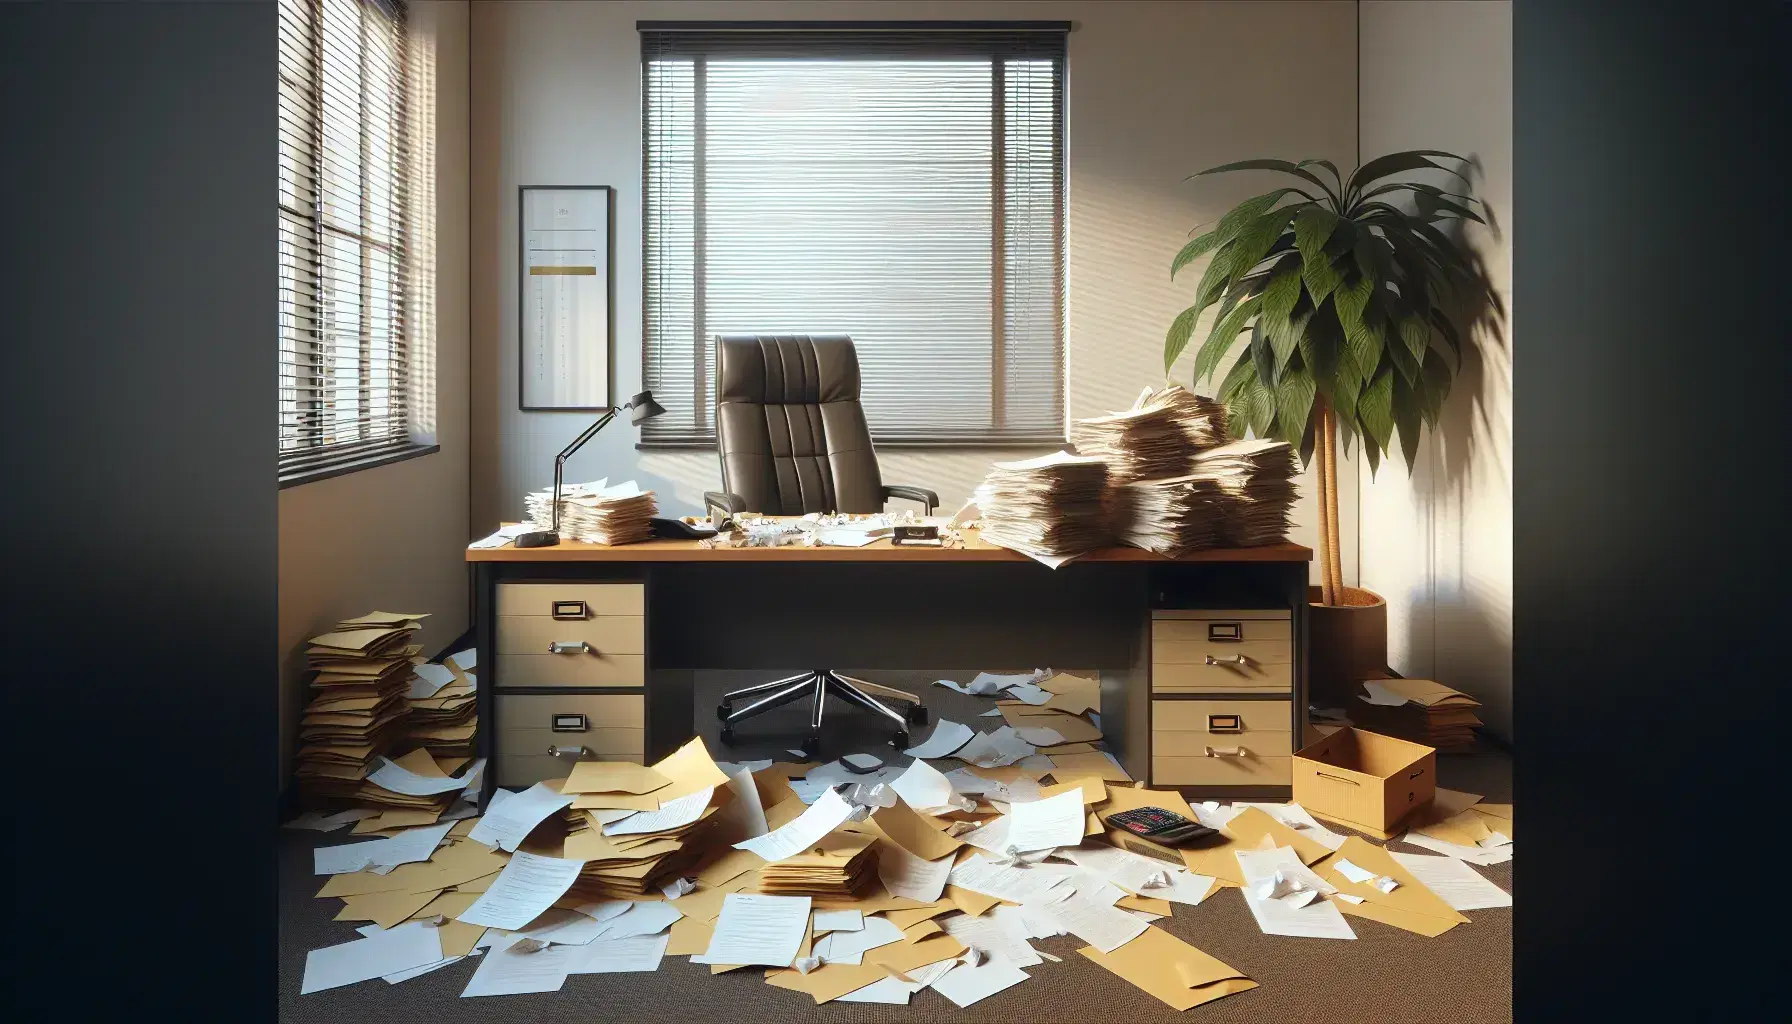 Disorganized office space with cluttered desk, scattered papers, overturned calculator, and toppled plant on a beige carpet, near a window with closed blinds.